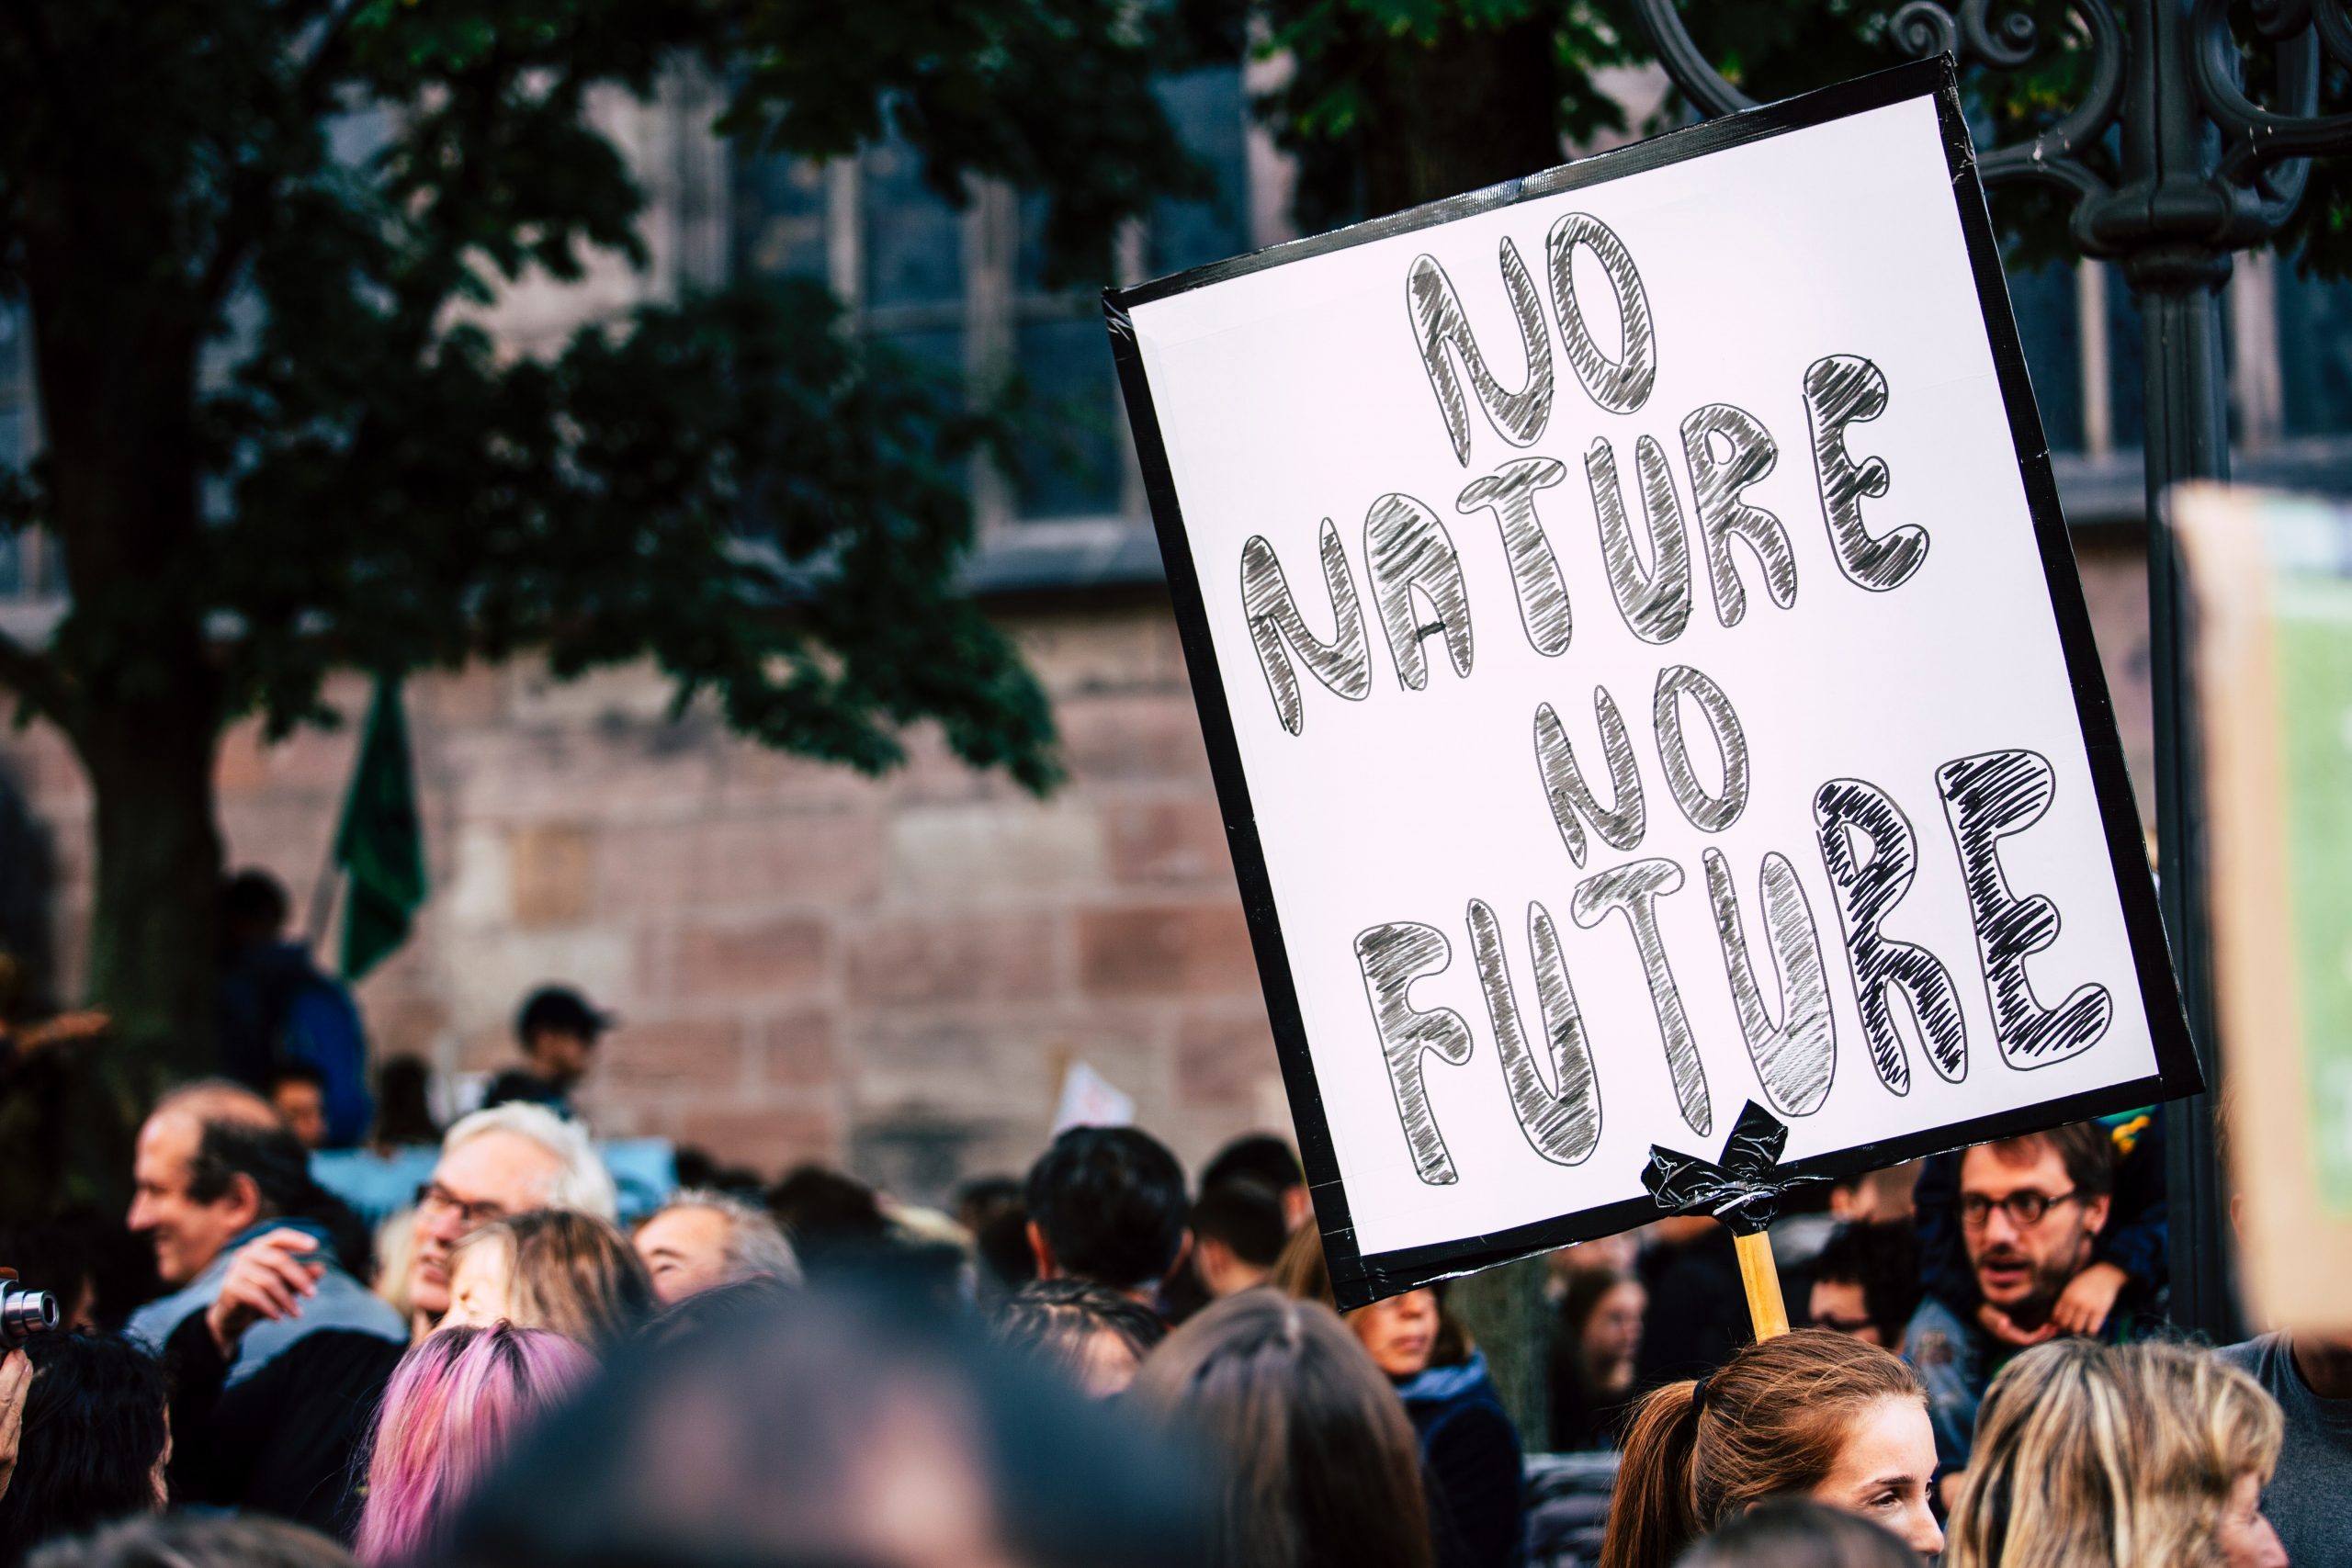 A sign held above a crowd of protestors reads "no nature no future"